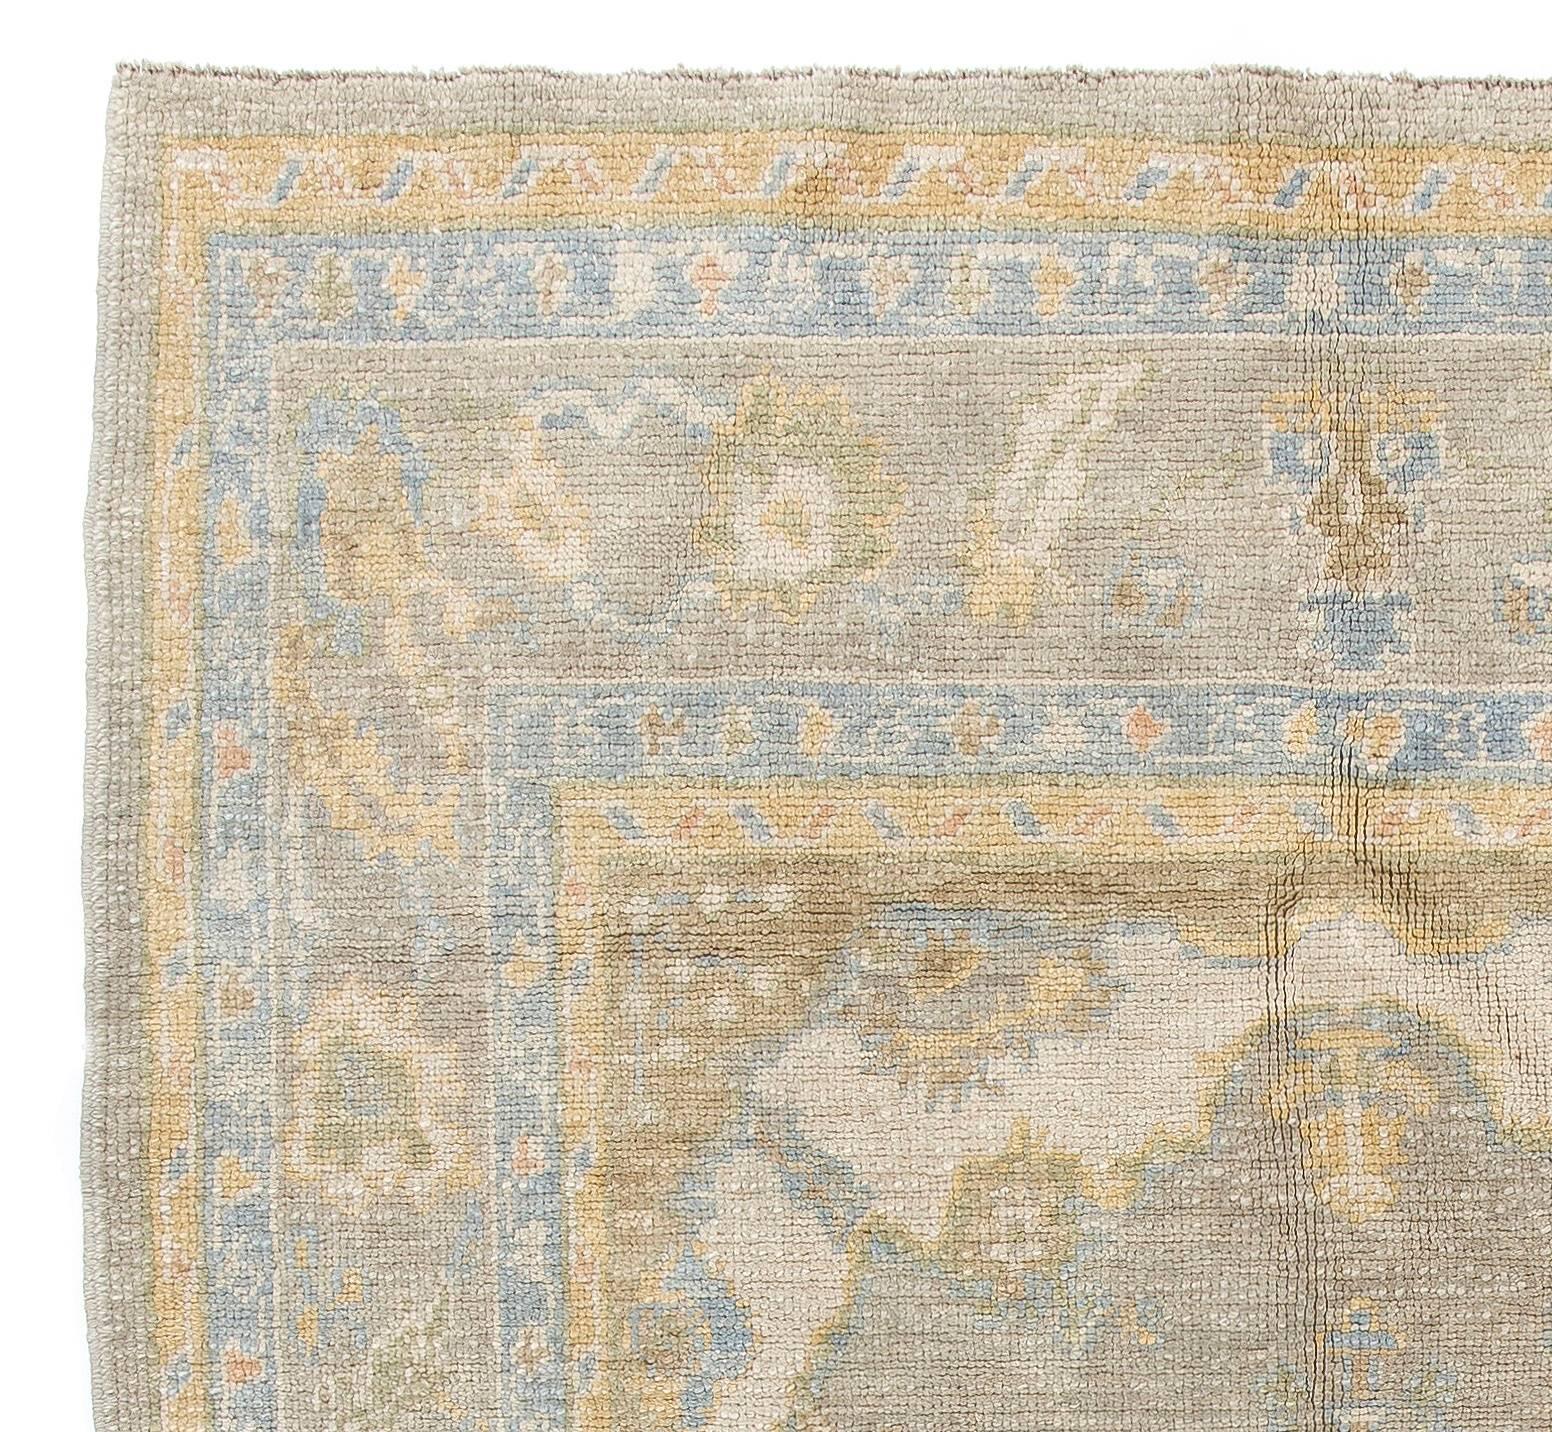 An antique inspired and look hand-knotted Oushak carpet made with finest
 hand-spun sheep wool.

Size: 5'4